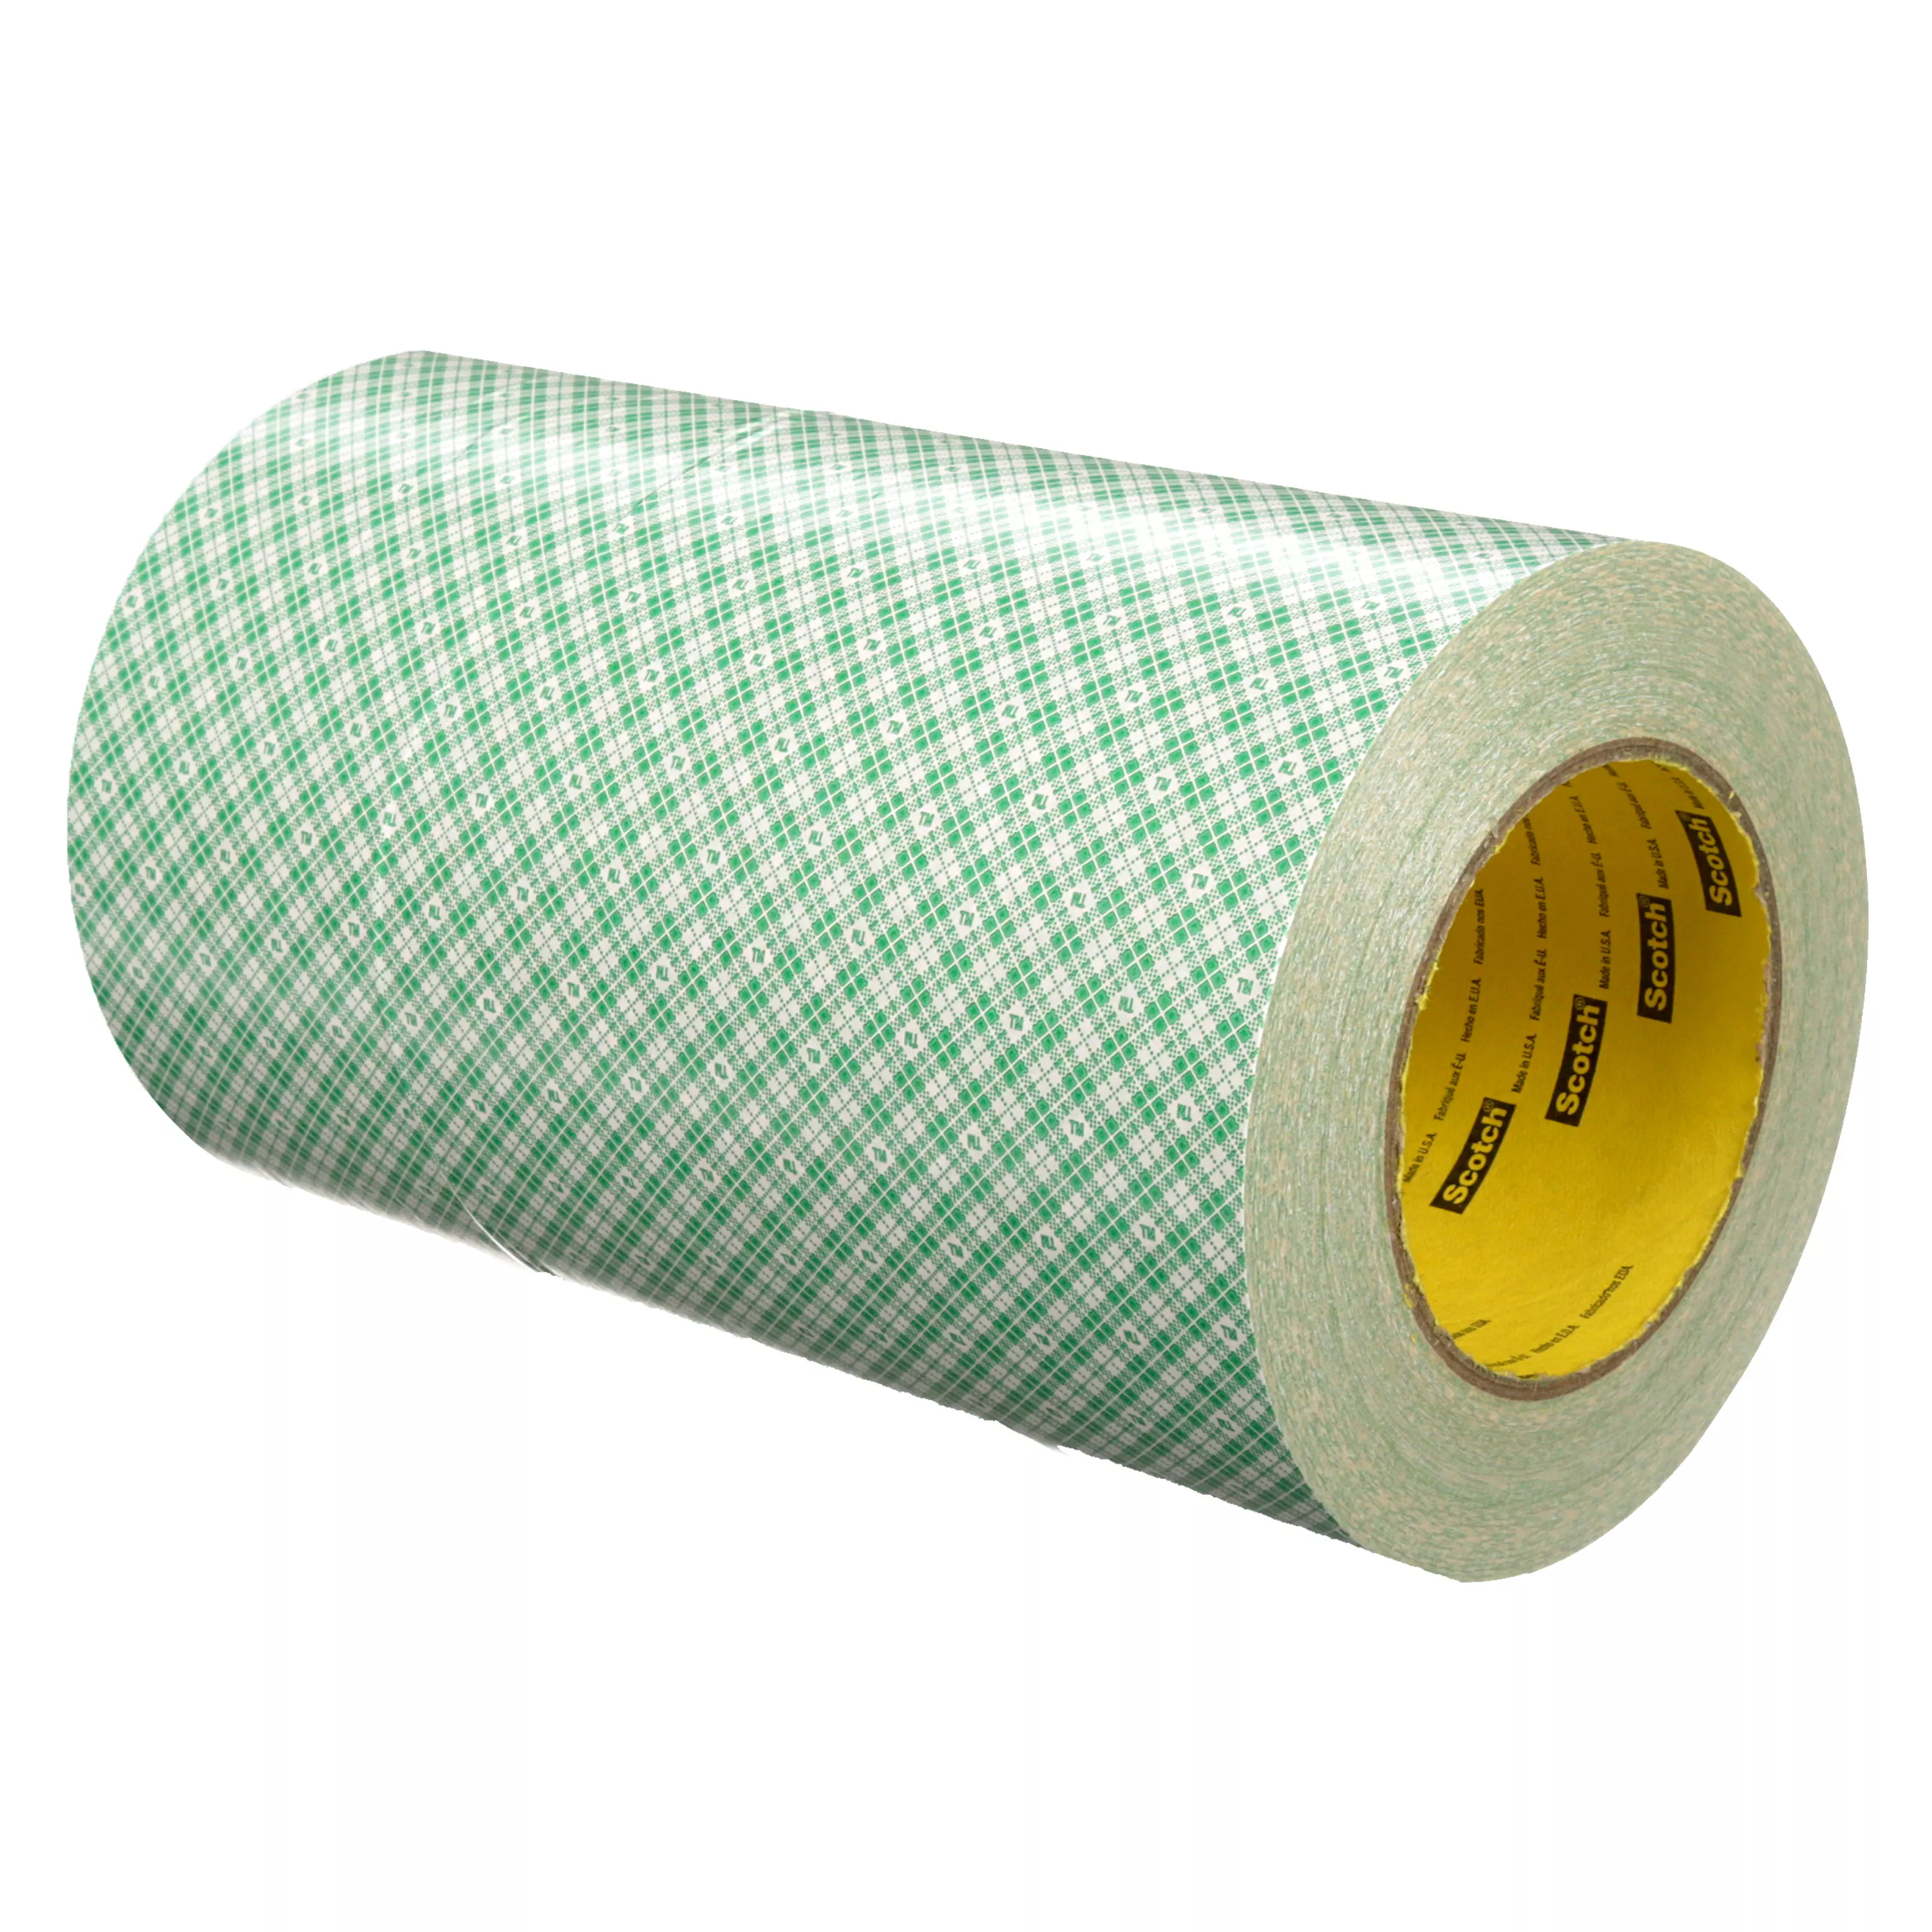 SKU 7000049327 | 3M™ Double Coated Paper Tape 410M